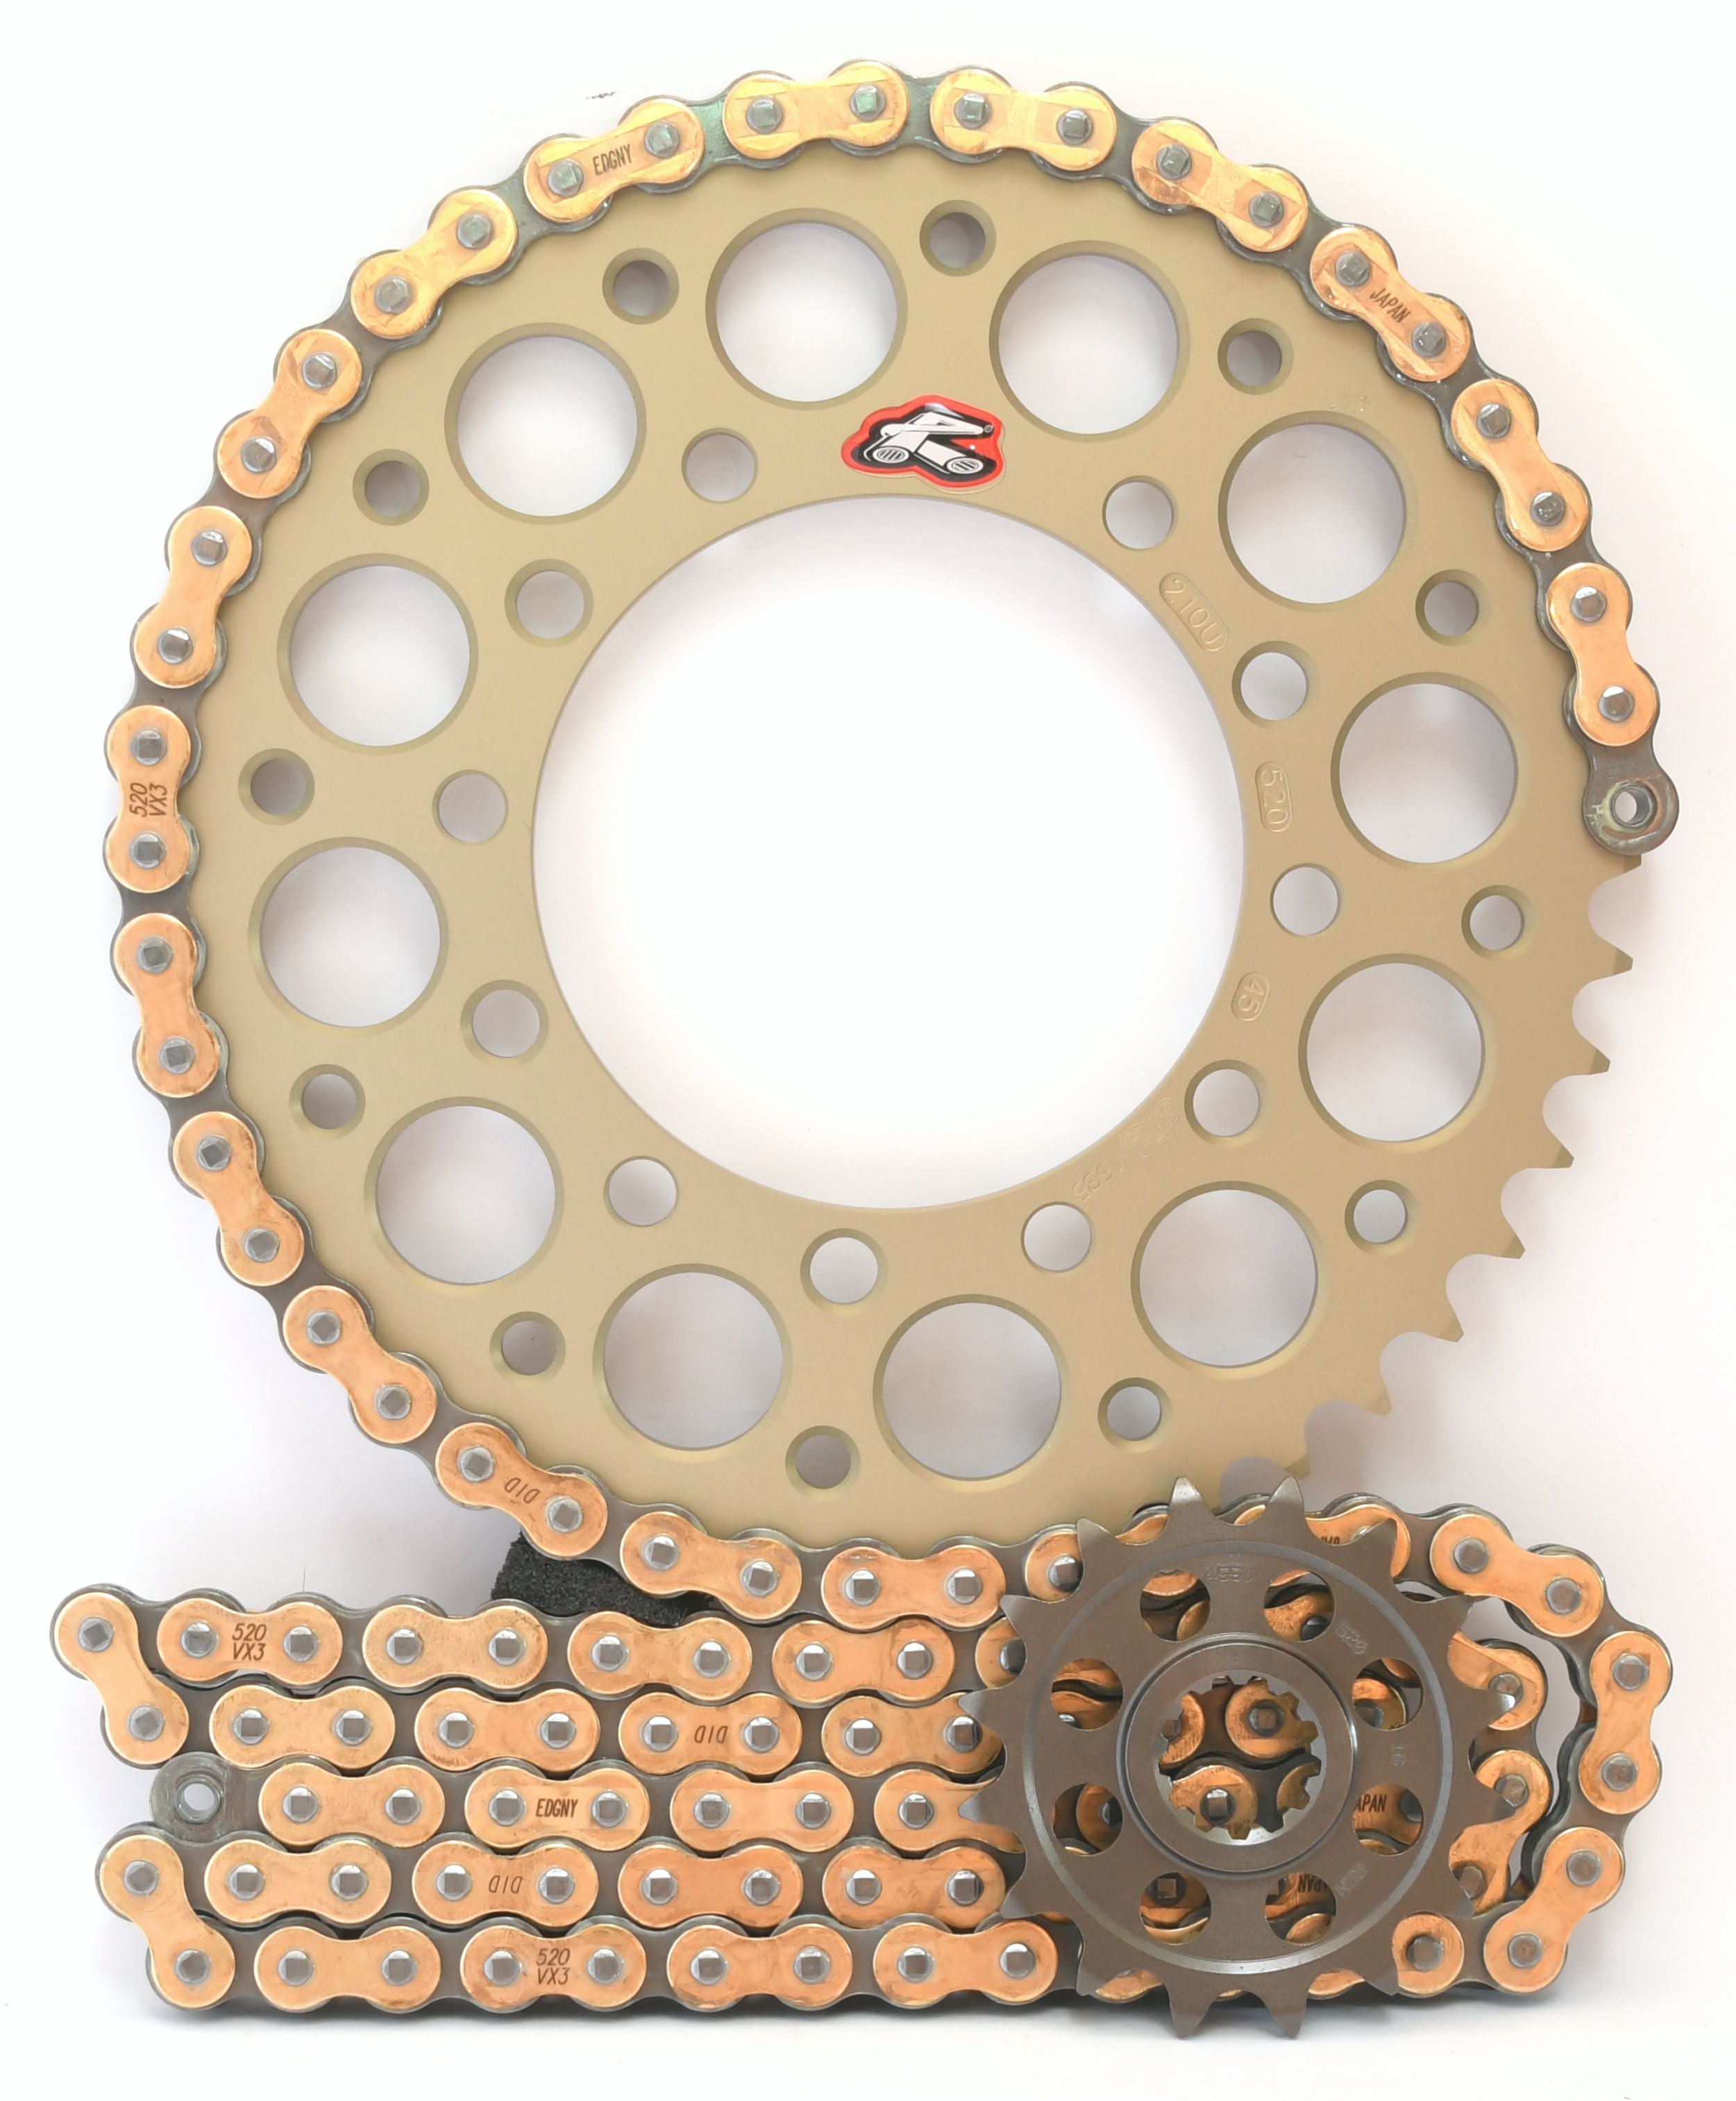 Renthal Ultralight DID Chain & Sprocket Kit 520 Conversion for Kawasaki ZX6R 1998-2002 - Choose Your Gearing